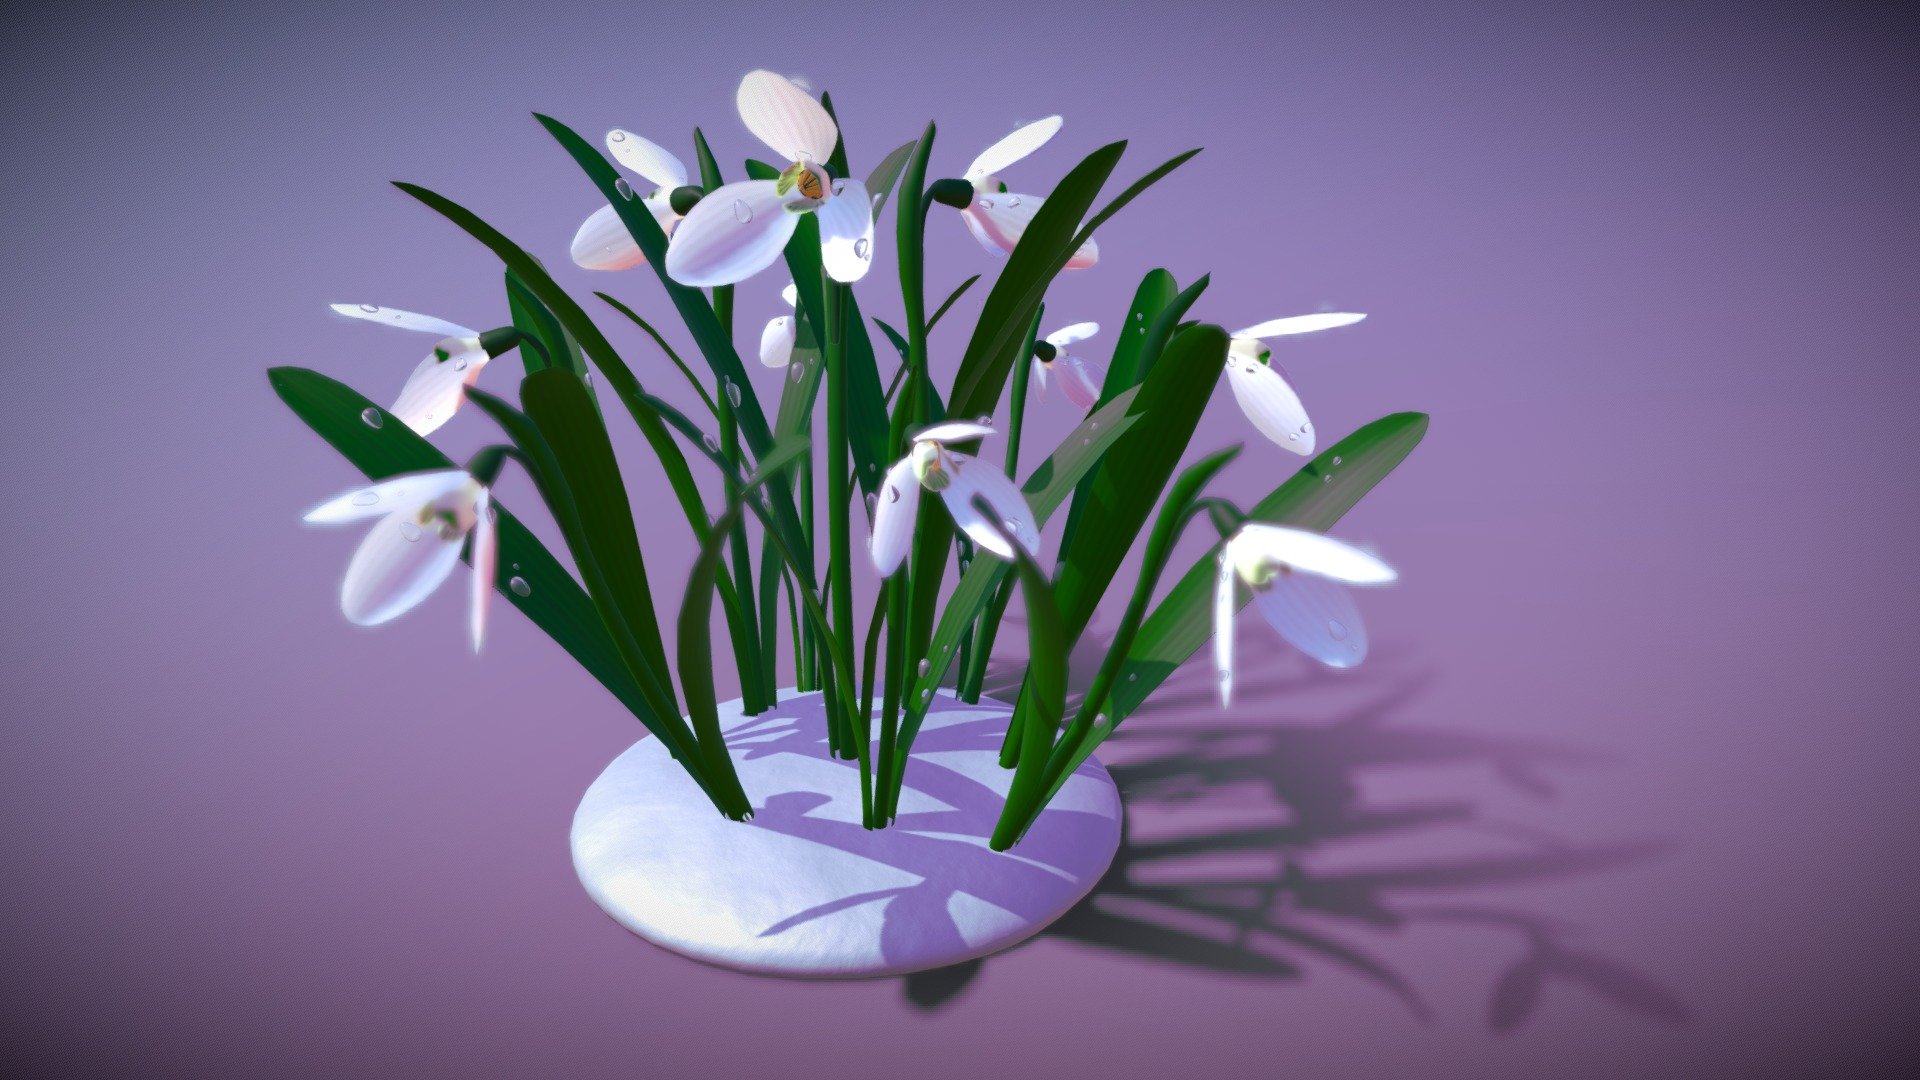 3d low-poly model
made in Blender 3.21
rigged and animated in fbx and blend files
in blend file 3 there is some drops made with particle system
actualy model is one flower others are instance in Blenders files - spring flowers galanthus - Buy Royalty Free 3D model by pinotoon 3d model